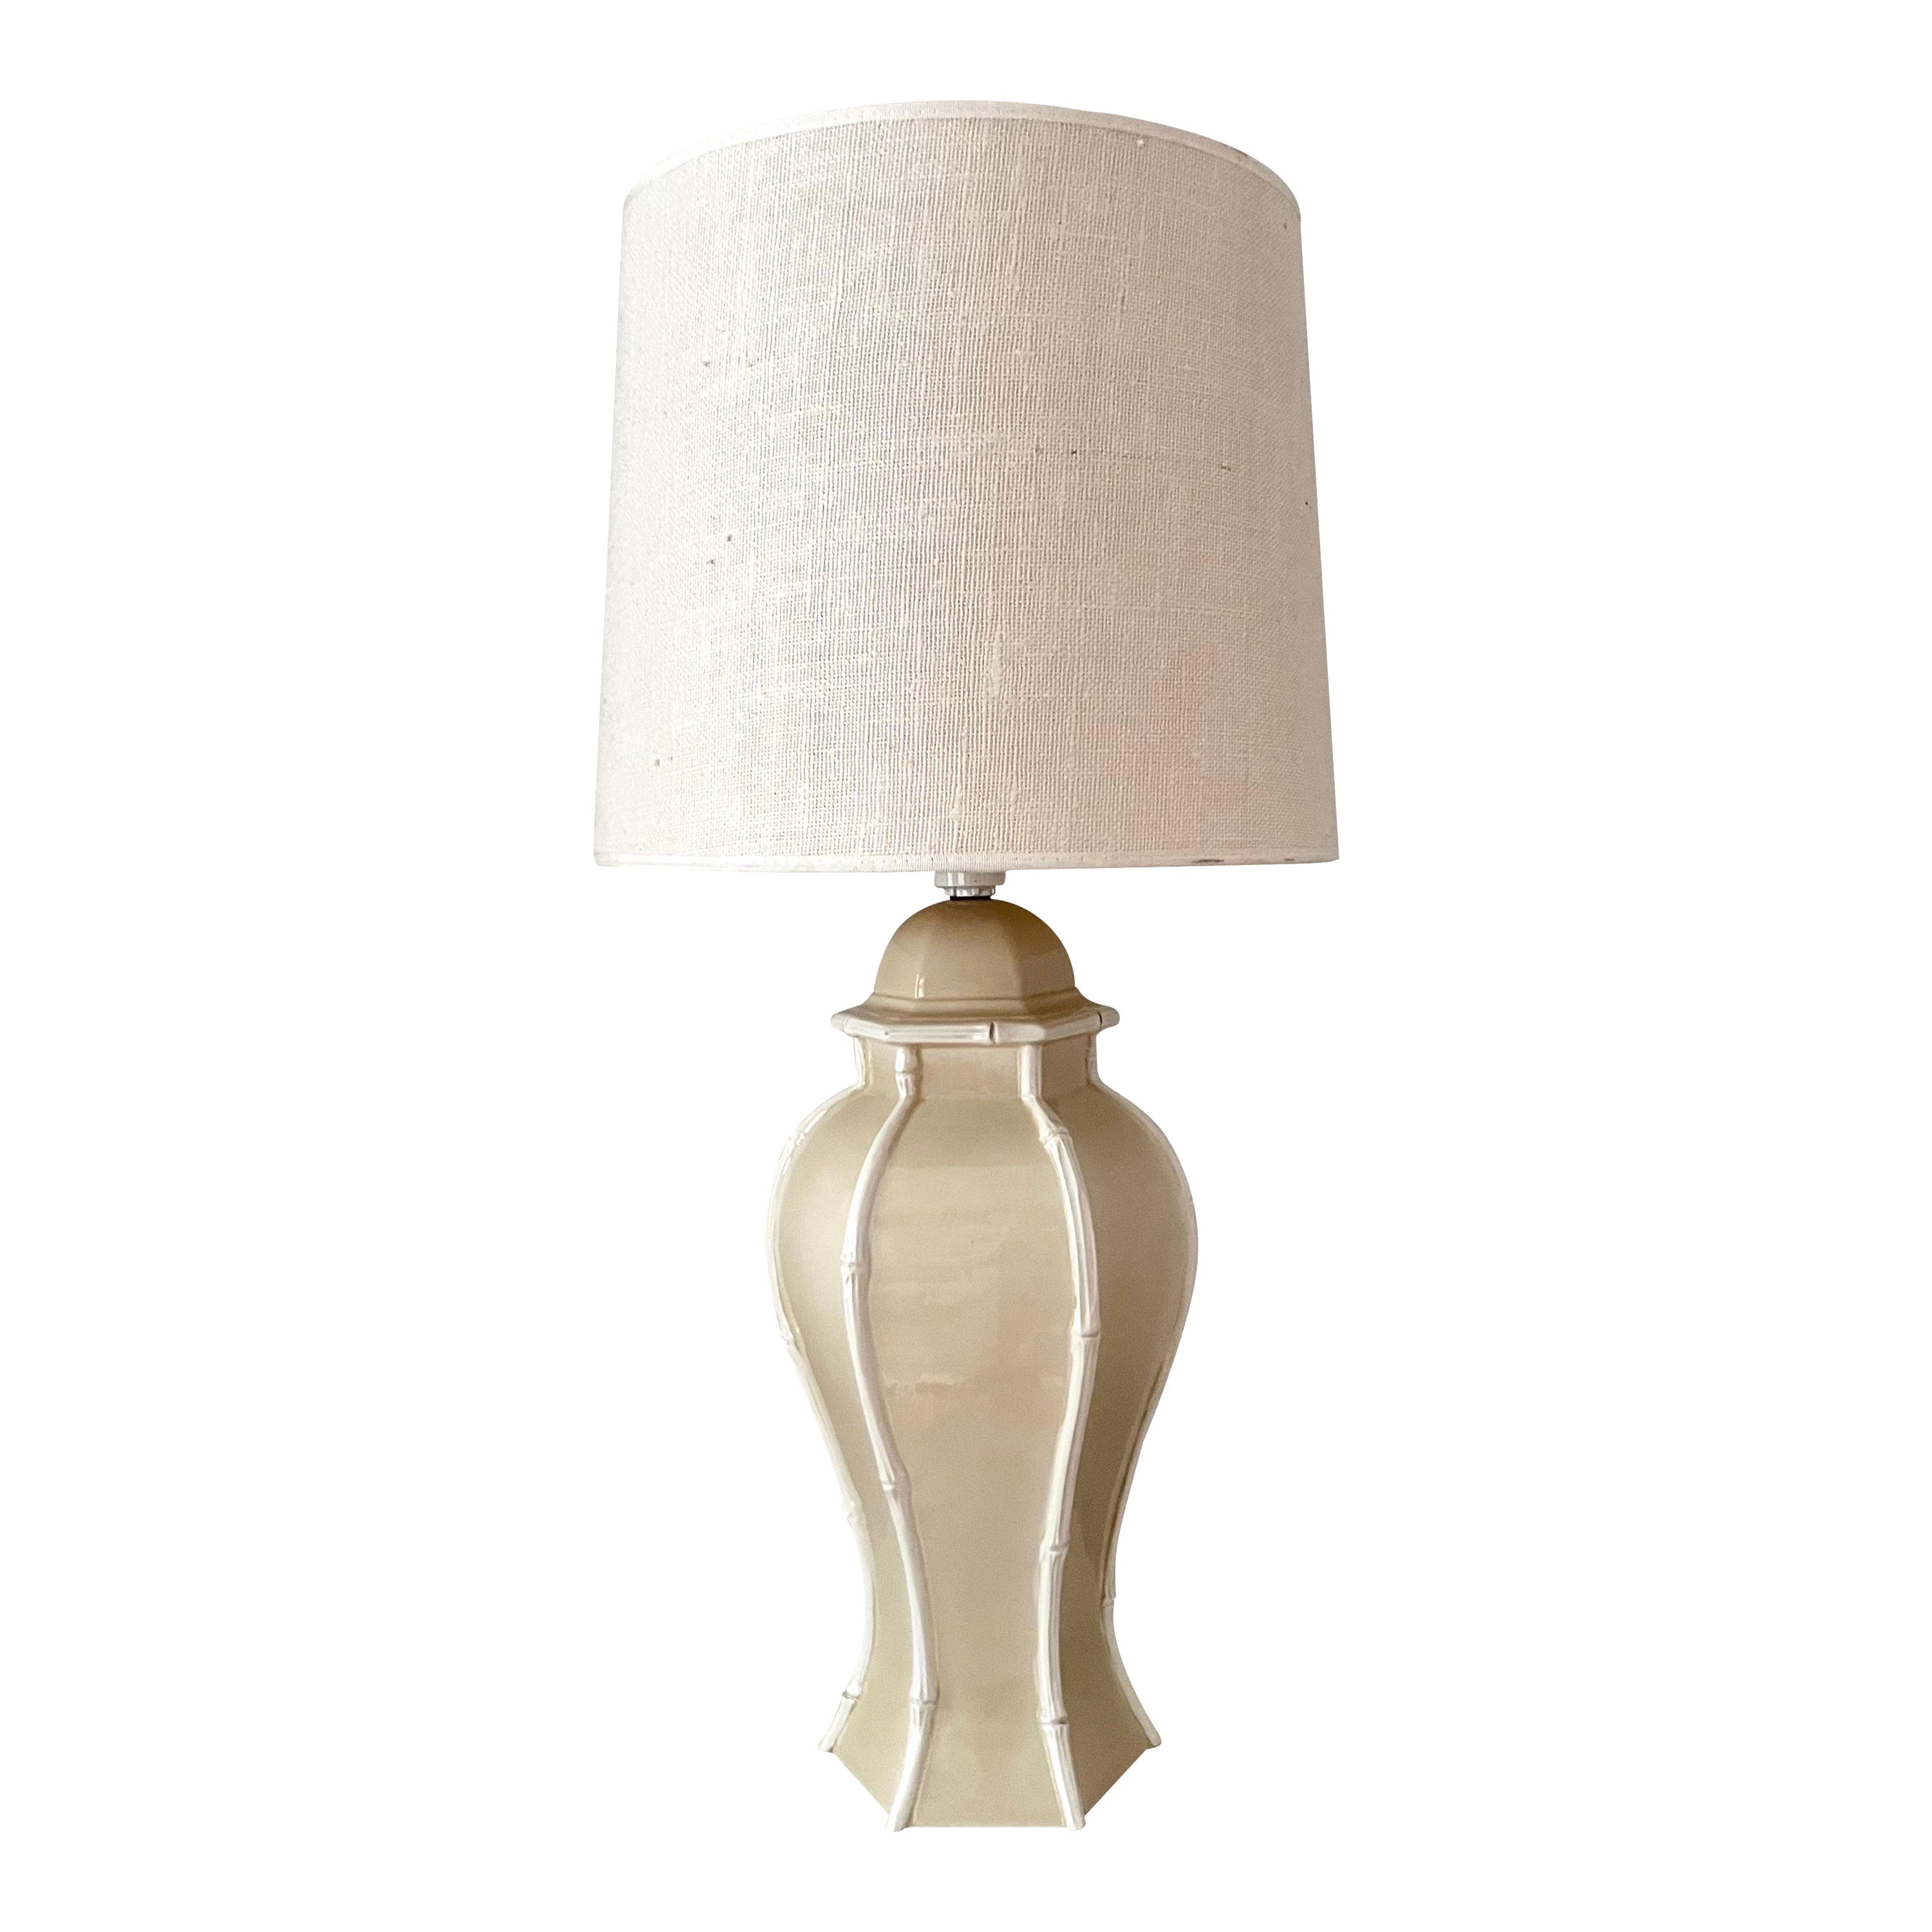 Elegant Tall Ceramic Table Lamp with Bamboo-Inspired Design